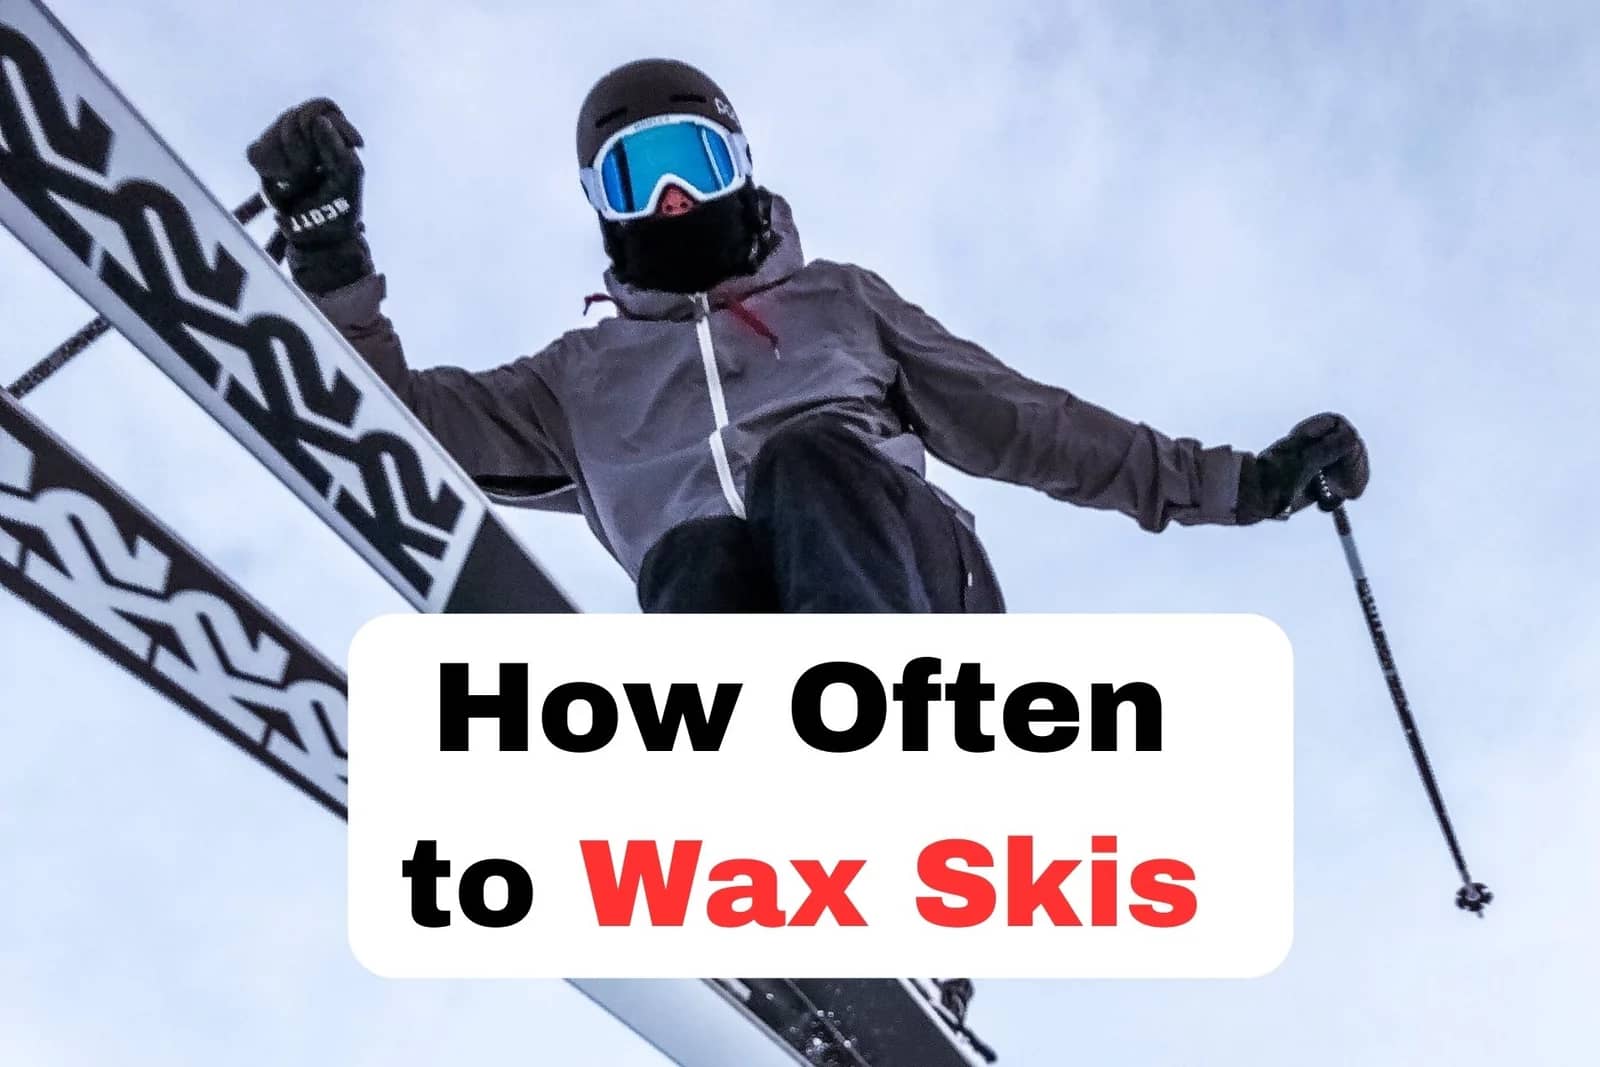 how often to wax skis featured